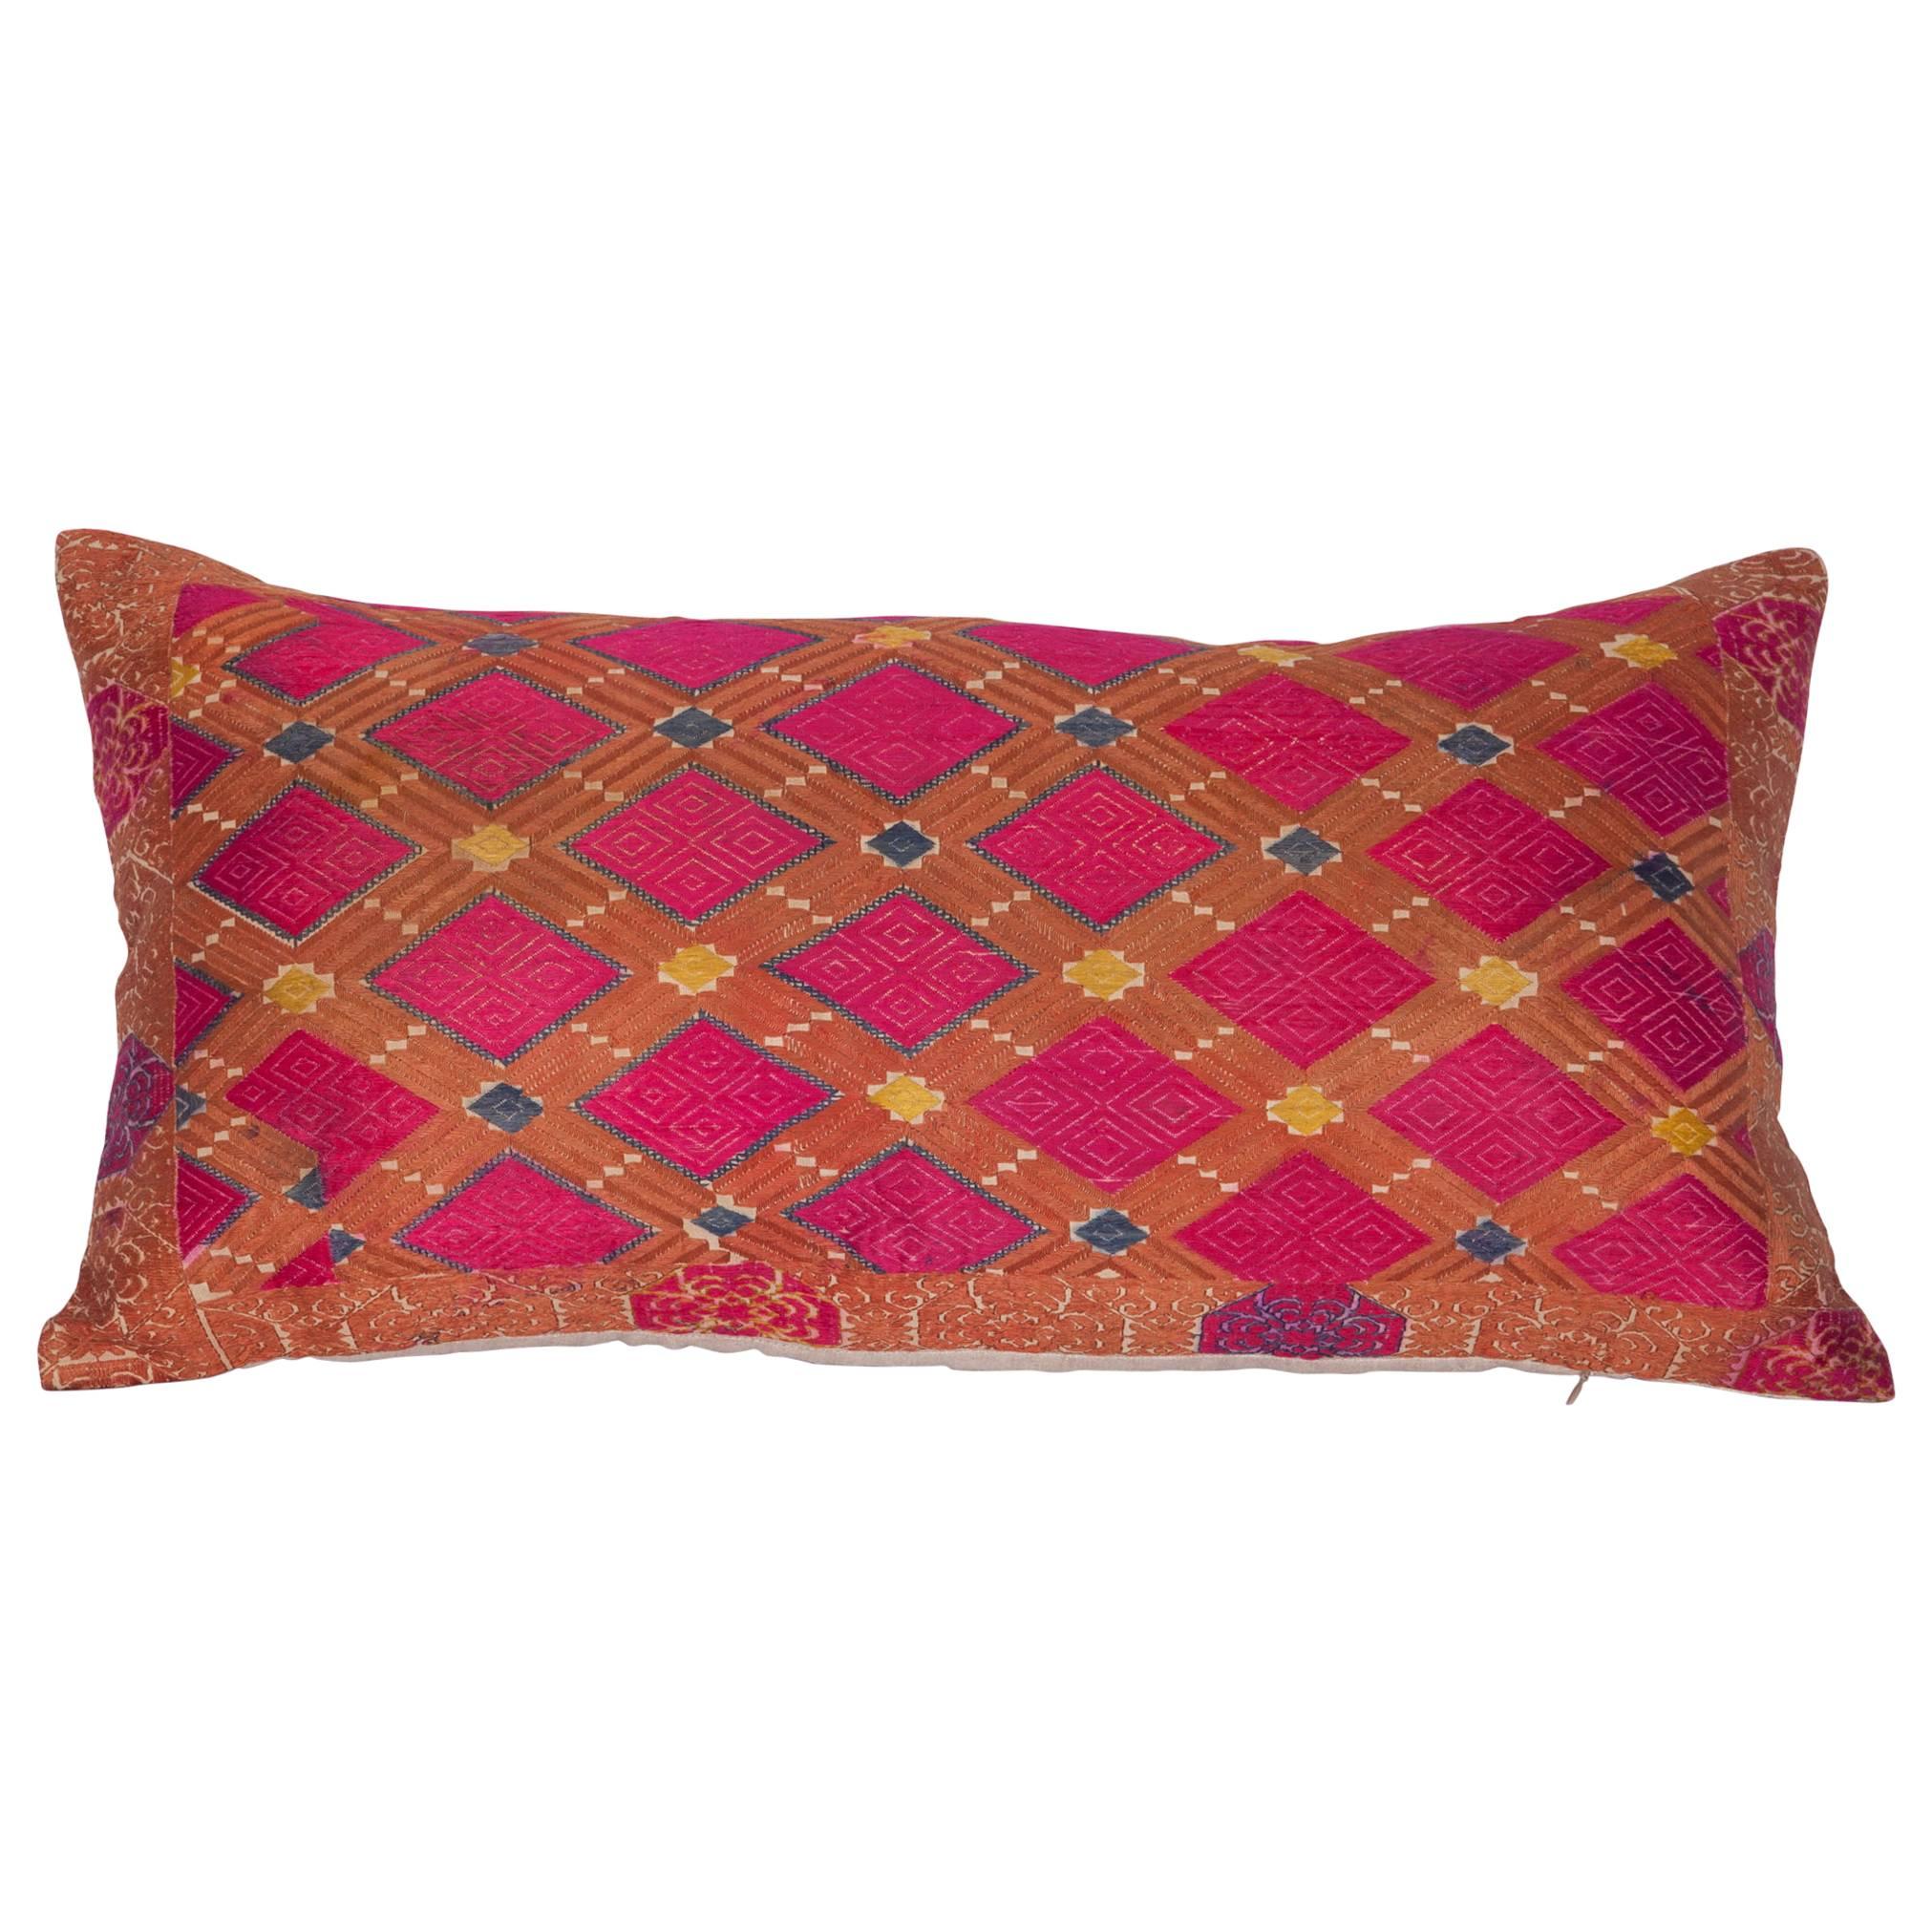 Pillow Made Out of a 1930s Swat Embroidery For Sale